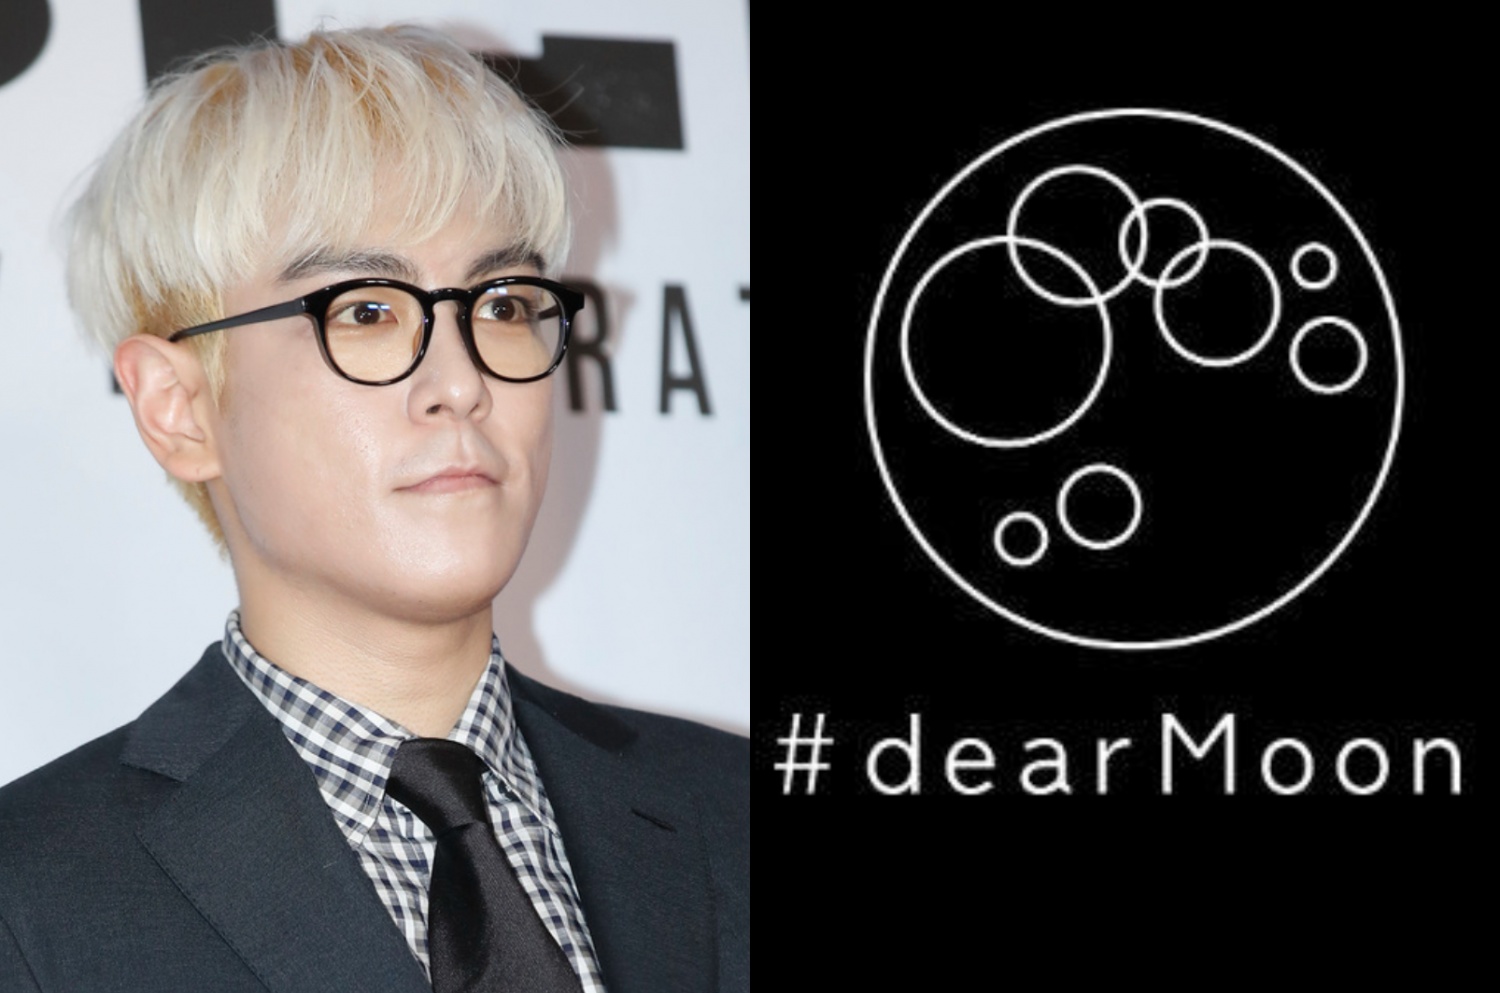 BIGBANG TOP has confirmed space travel + reason for applying for DearMoon Project 2023